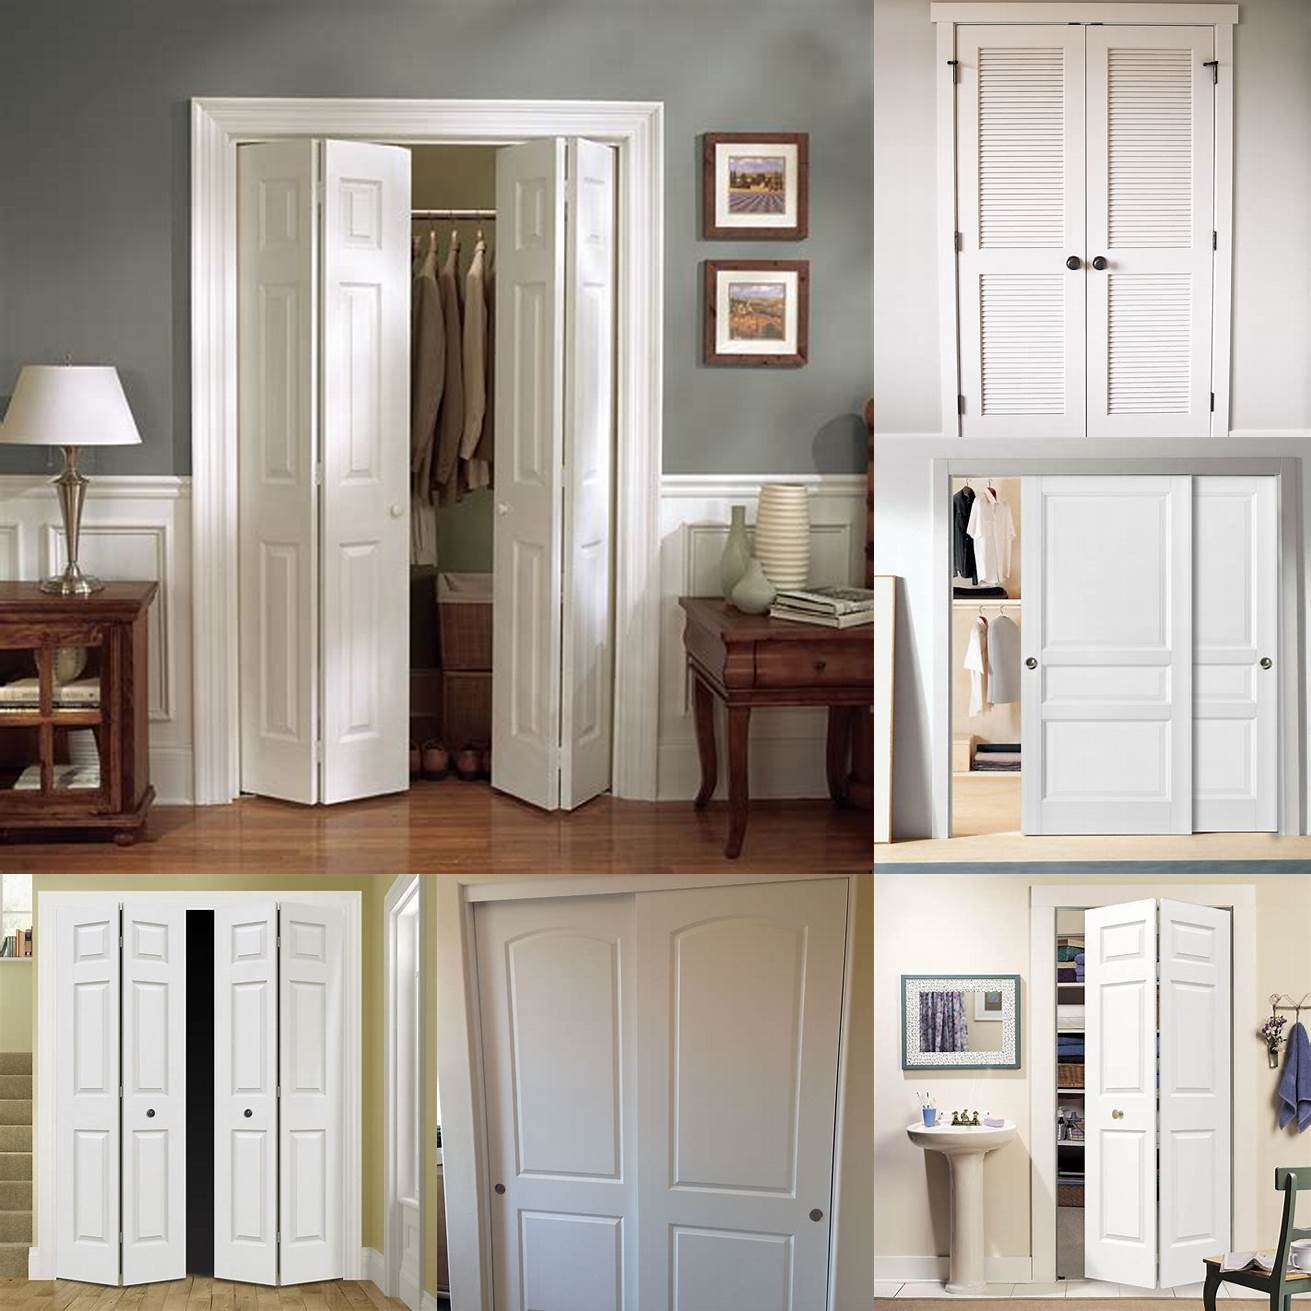 6 Closet Doors a set of doors that can be installed in front of a closet to hide its contents